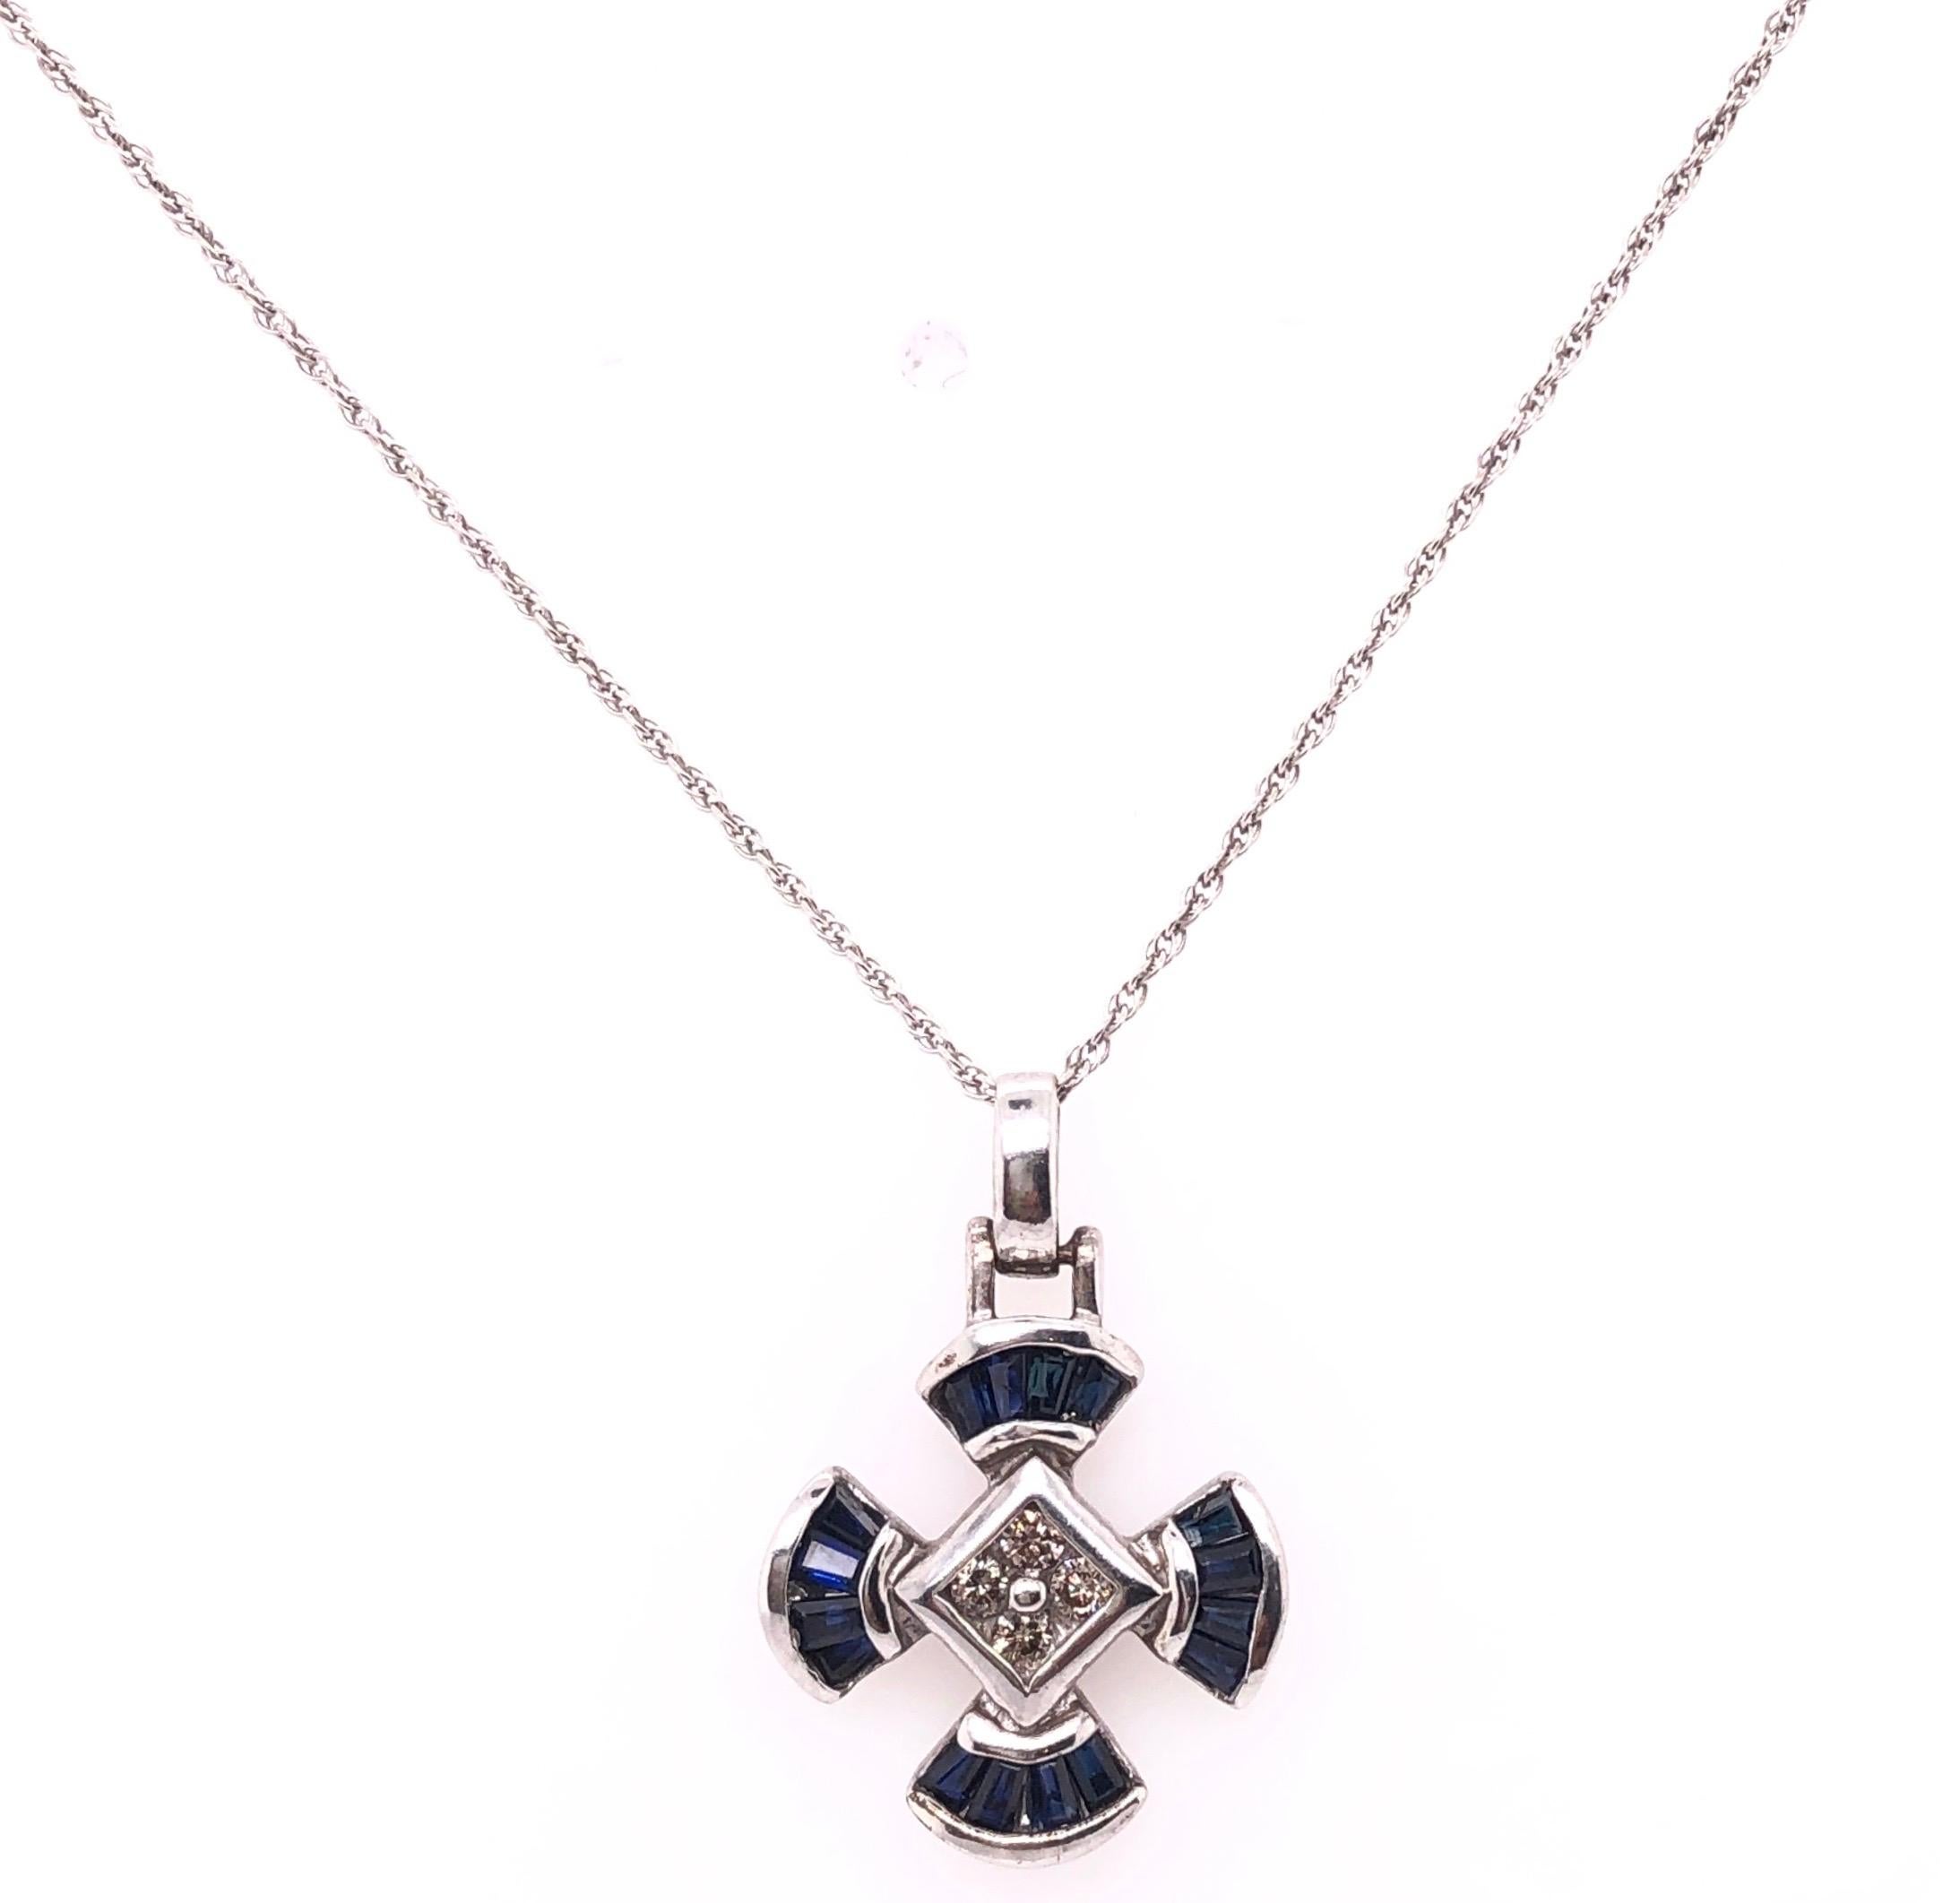 14 Karat White Gold 15 Inch Sapphire and Diamond Pendant Necklace
0.25 total diamond weight
2.04 grams total weight.